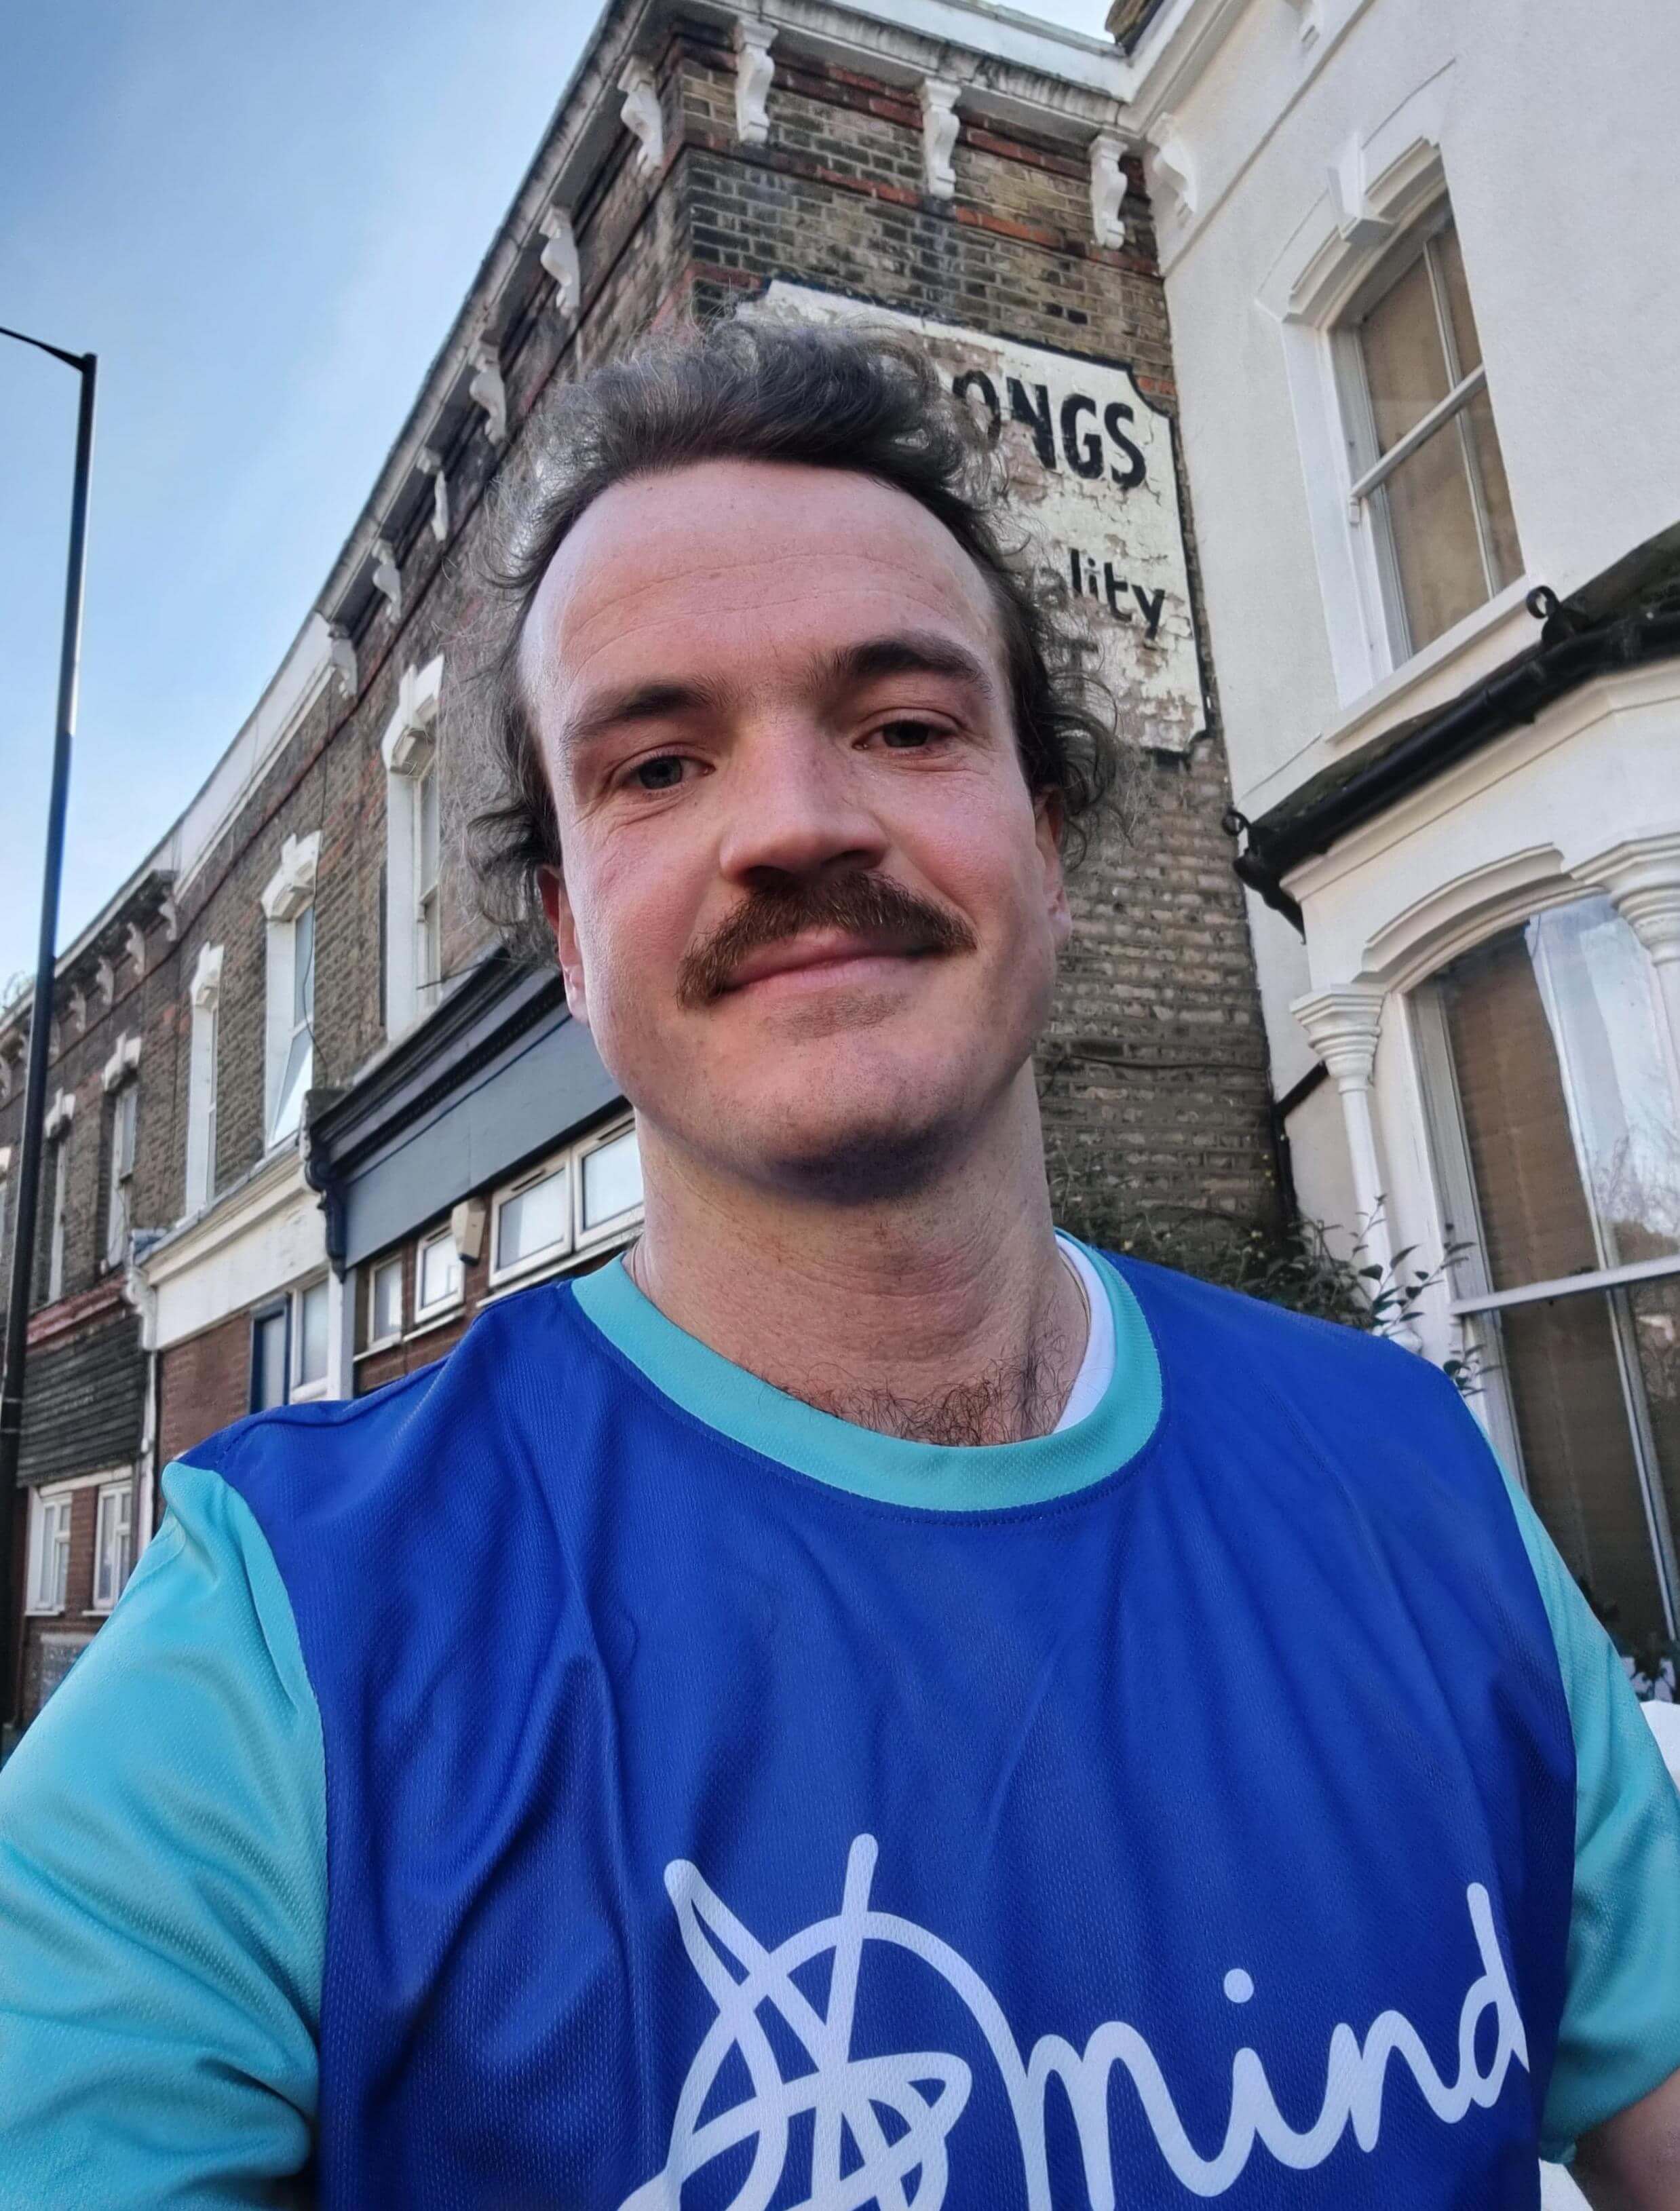 A charity runner for Mind